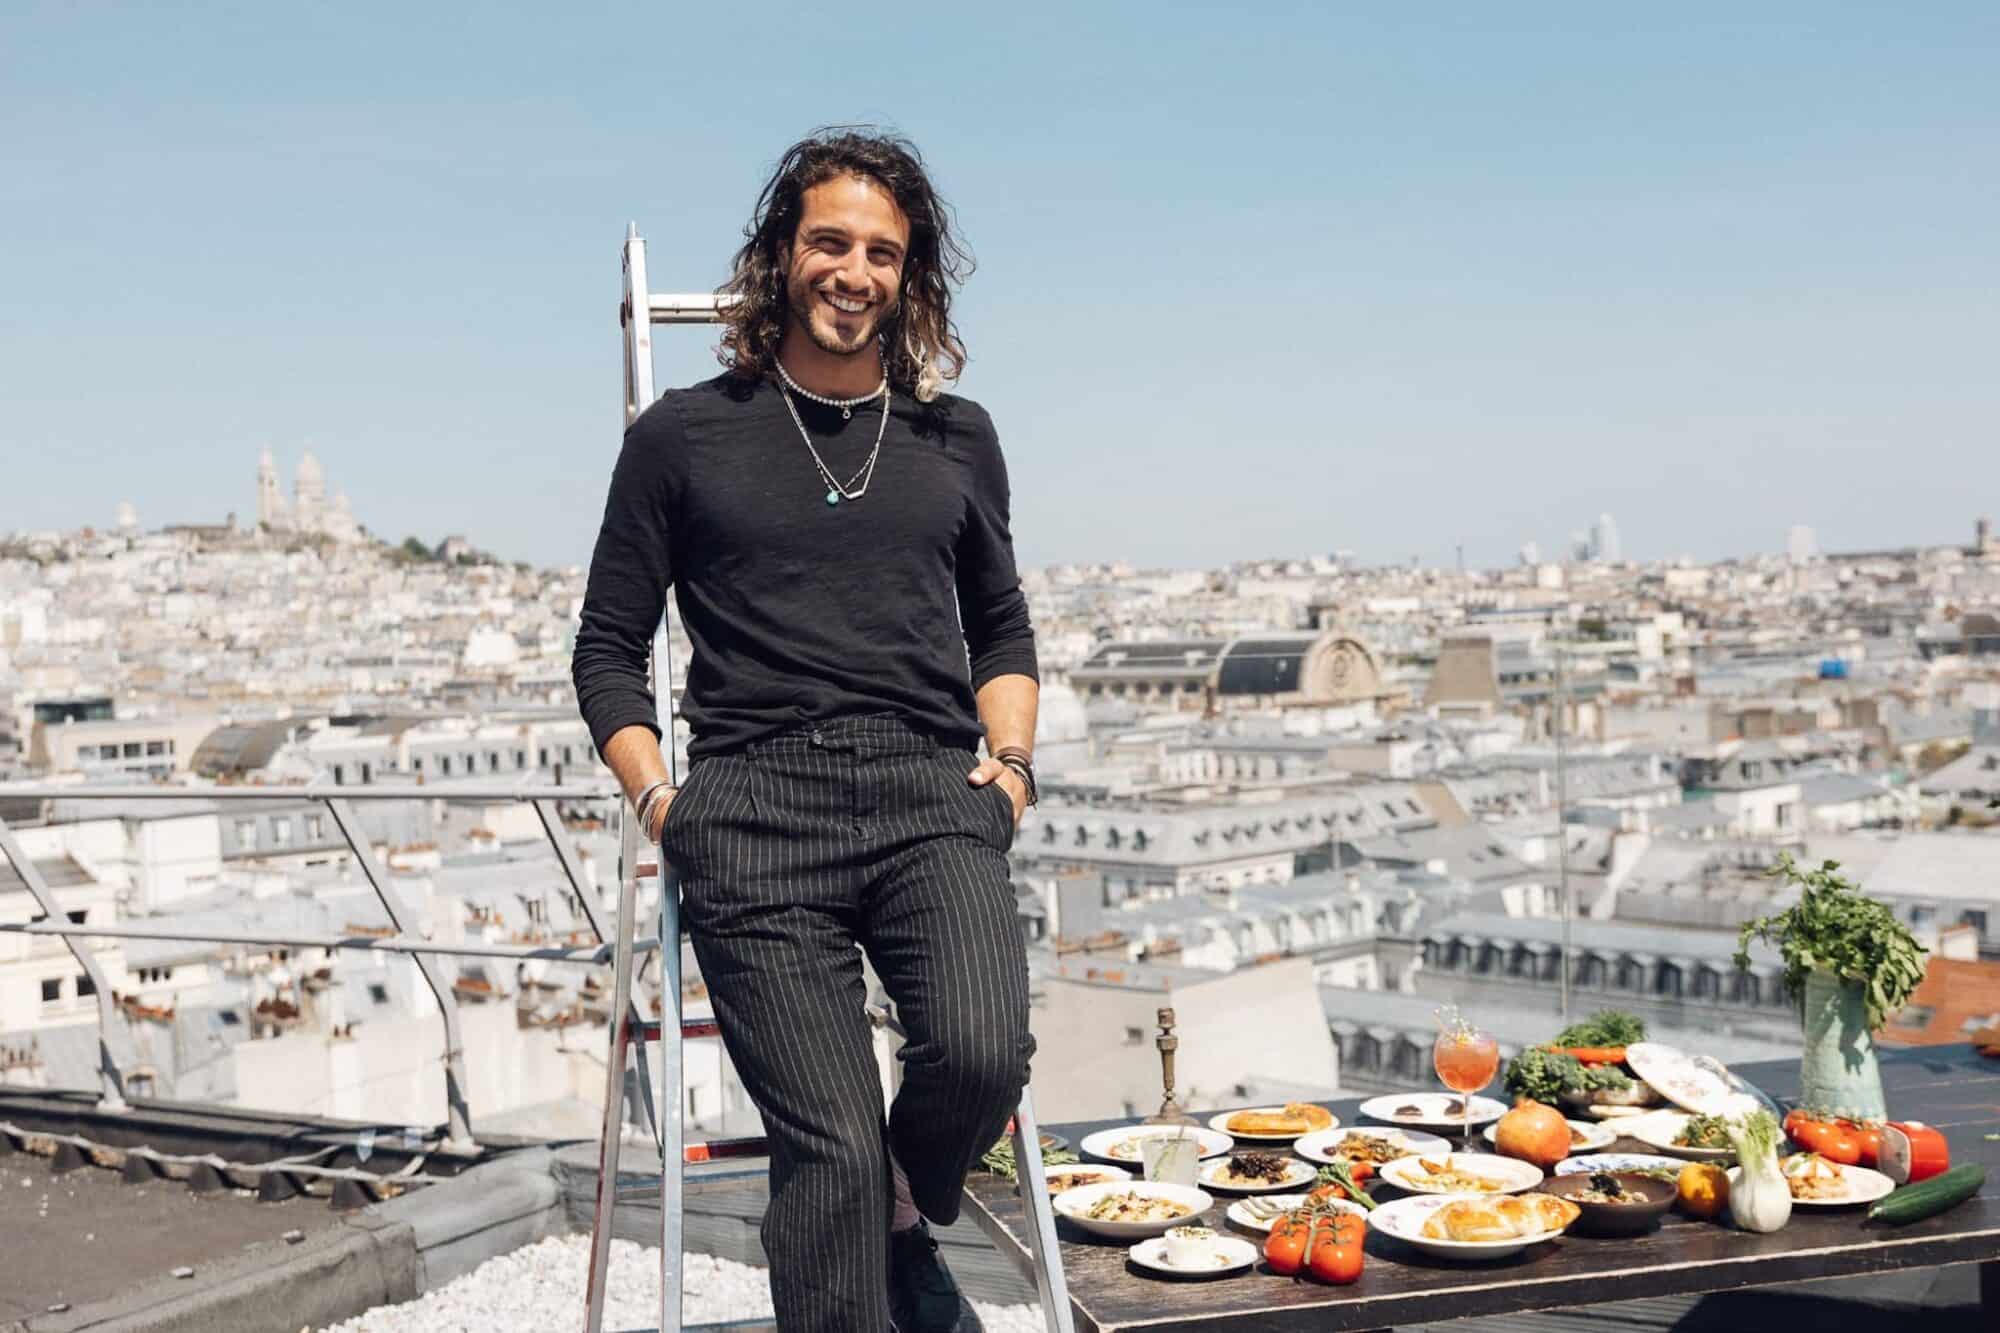 Julien Sebbag dressed in all black leans against a ladder on the roof top of Galeries Lafayette with Sacre Coeur in the background and a tray of food to his left.